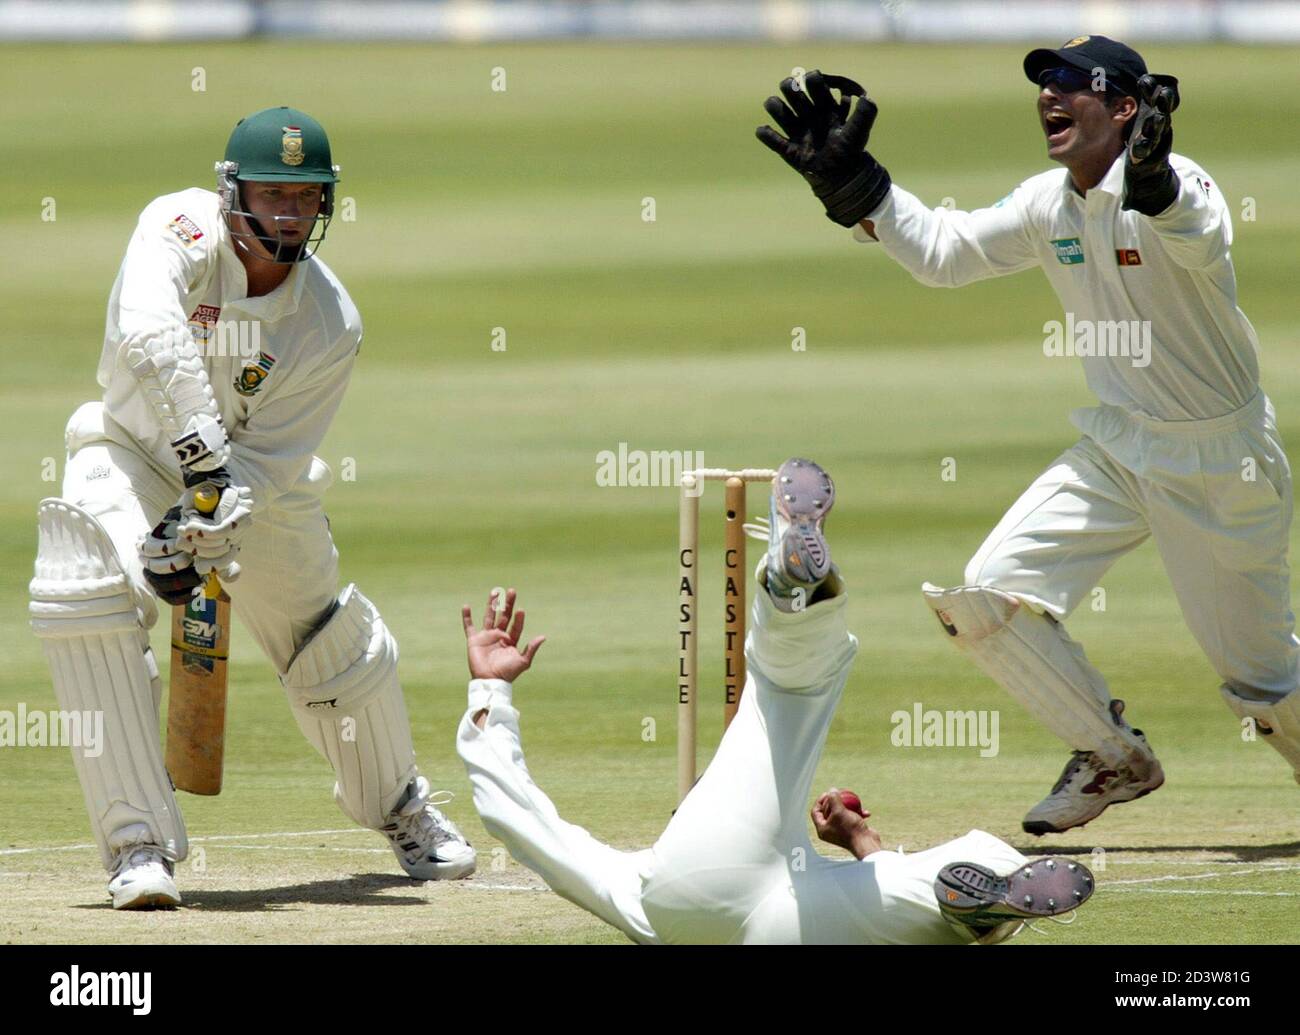 Sri Lankan wicketkeeper Kumar Sangakkar (R) reacts as fielder Russel Premakumaran Arnold dives to catch the ball off South African batsman Graeme Smith (L) on the second day of their test played at Wanderers Stadium, Johannesburg, November 9, 2002. The umpire gave Smith not out. Sri Lanka scored 192 all out in the first innings. REUTERS/Anne Laing  AL/JDP Stock Photo